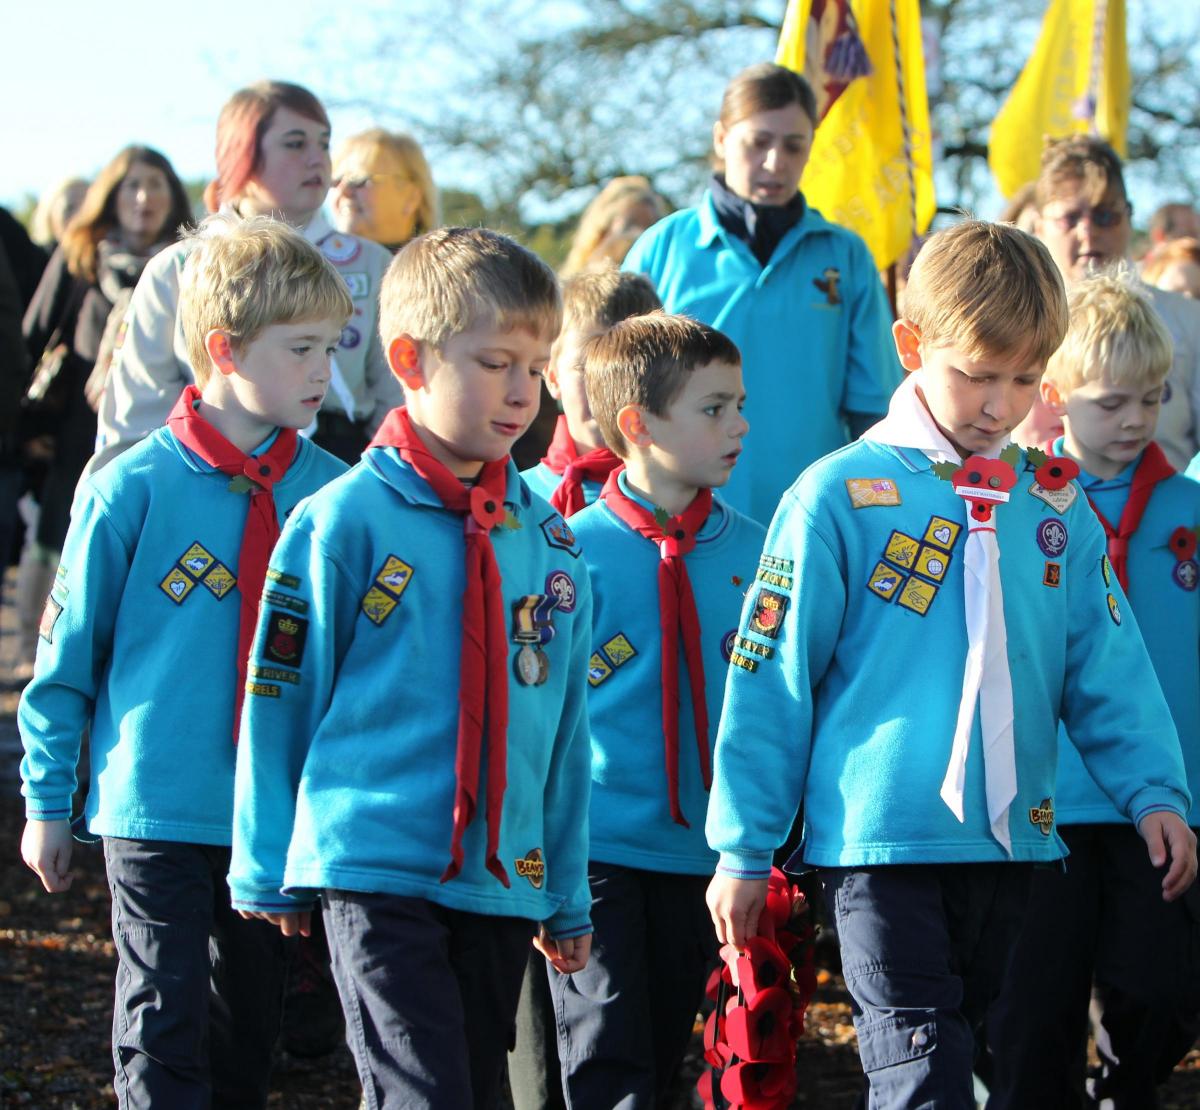 Pictures from the various remembrance services in the area - Copythorne.